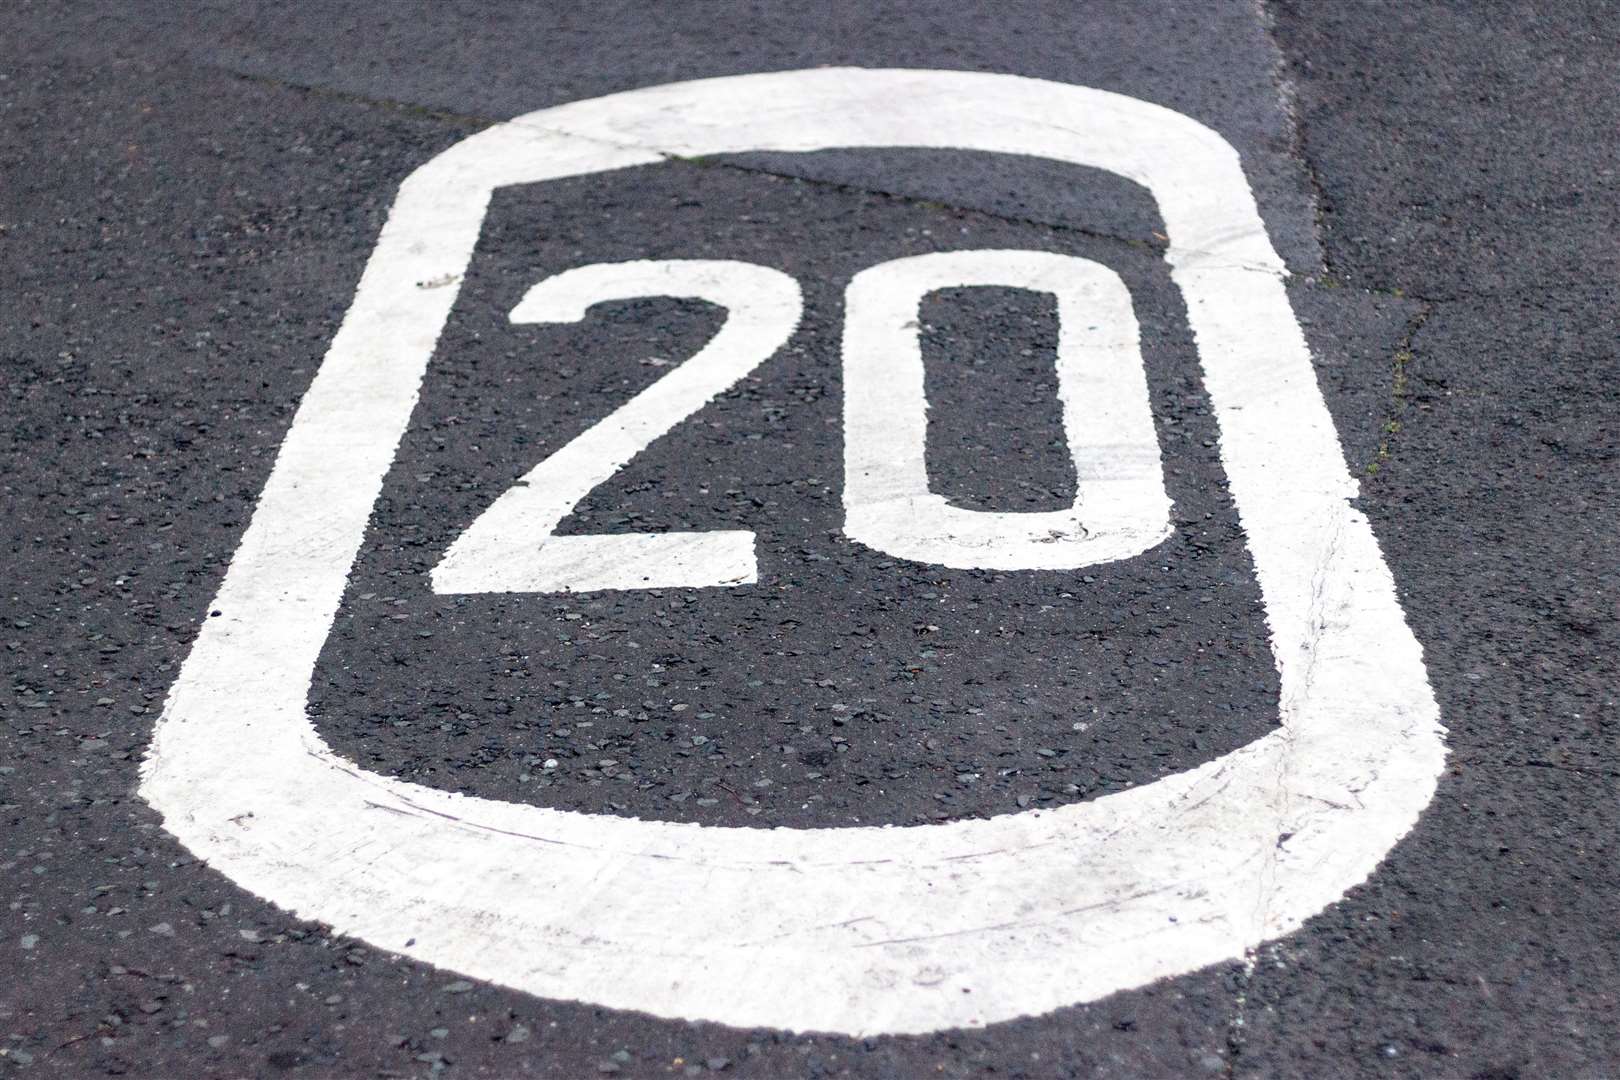 Speed limits of 20mph are primarily in residential areas.